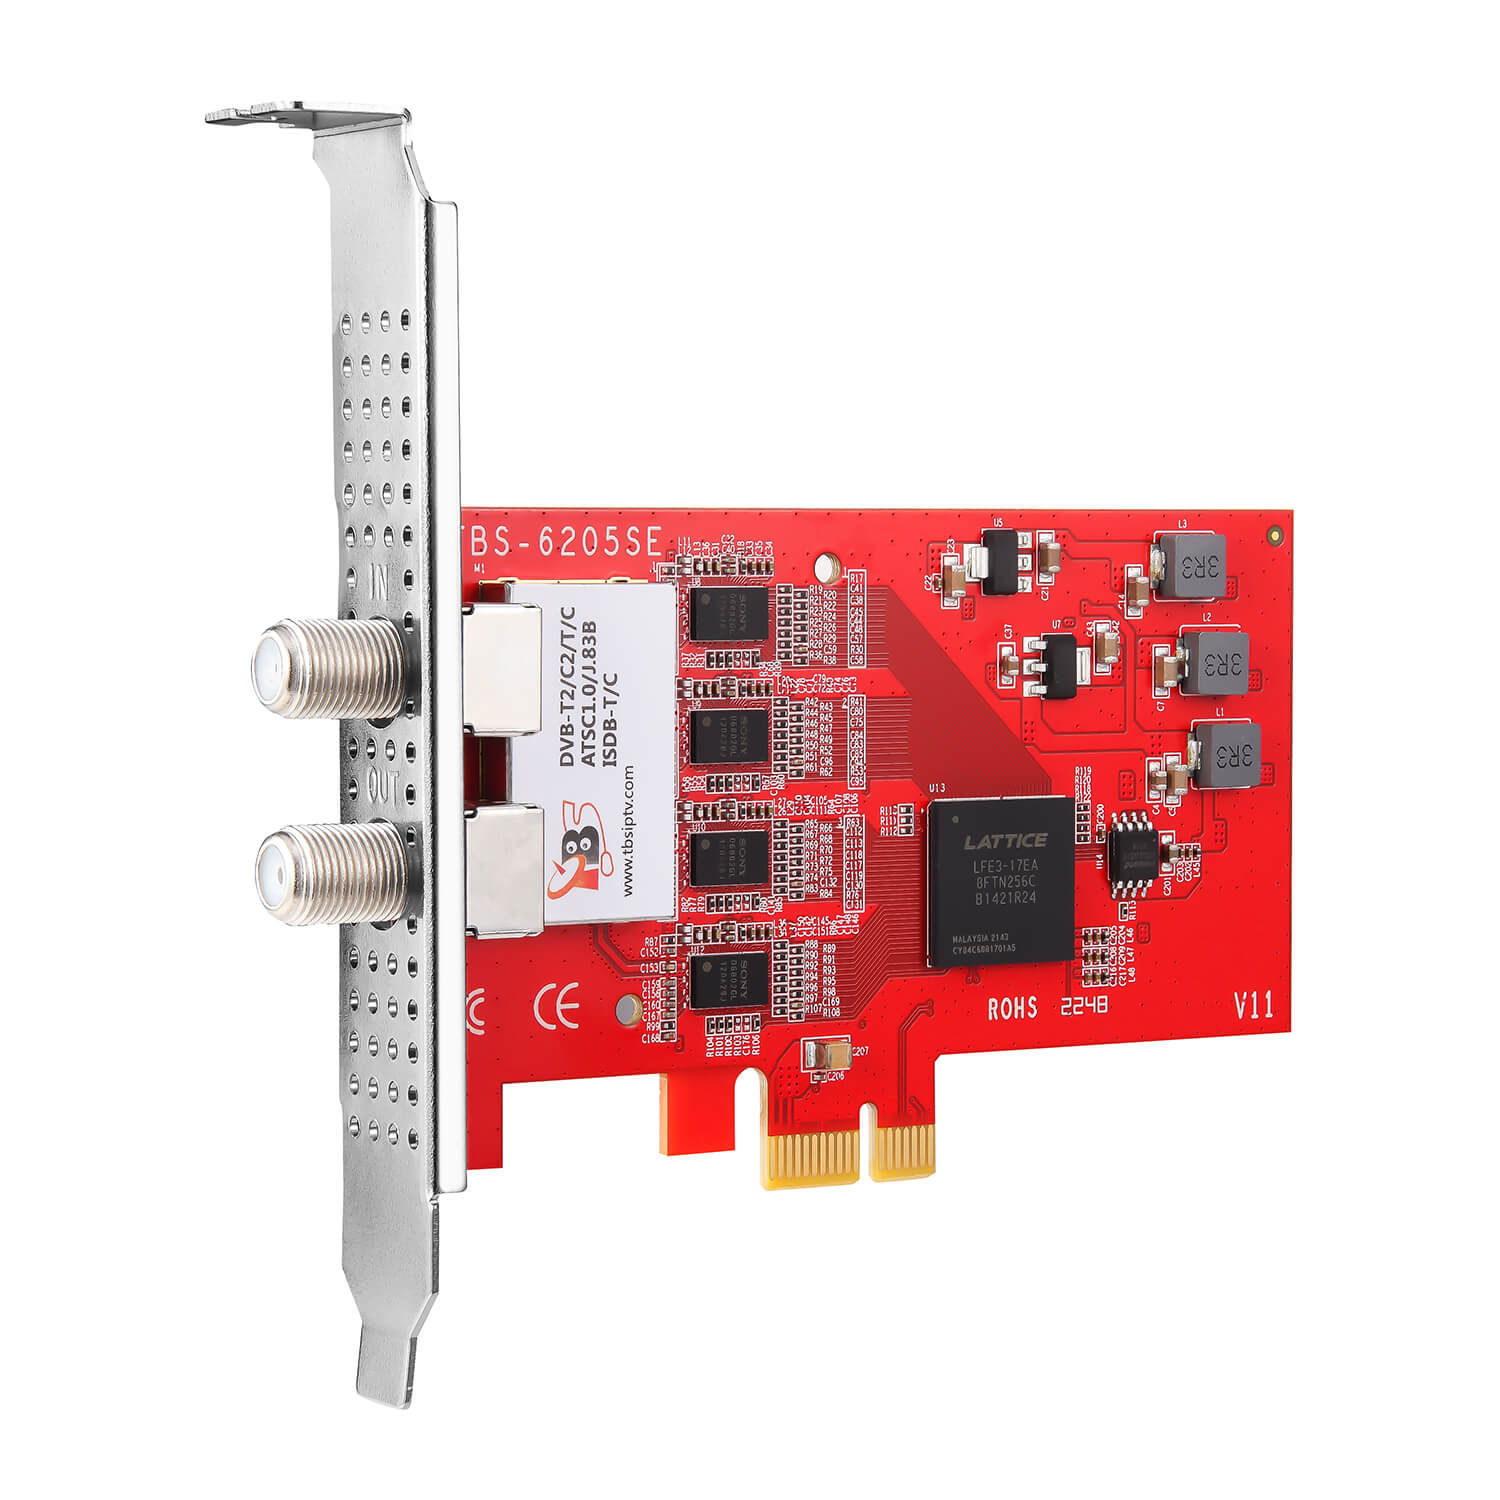 TBS 6205se DVB-T2 / C2 / T/C(J.83A/B/C) / ISDB-T/C / ATSC1.0 Quad PCIe  Digital TV Tuner Card for PC